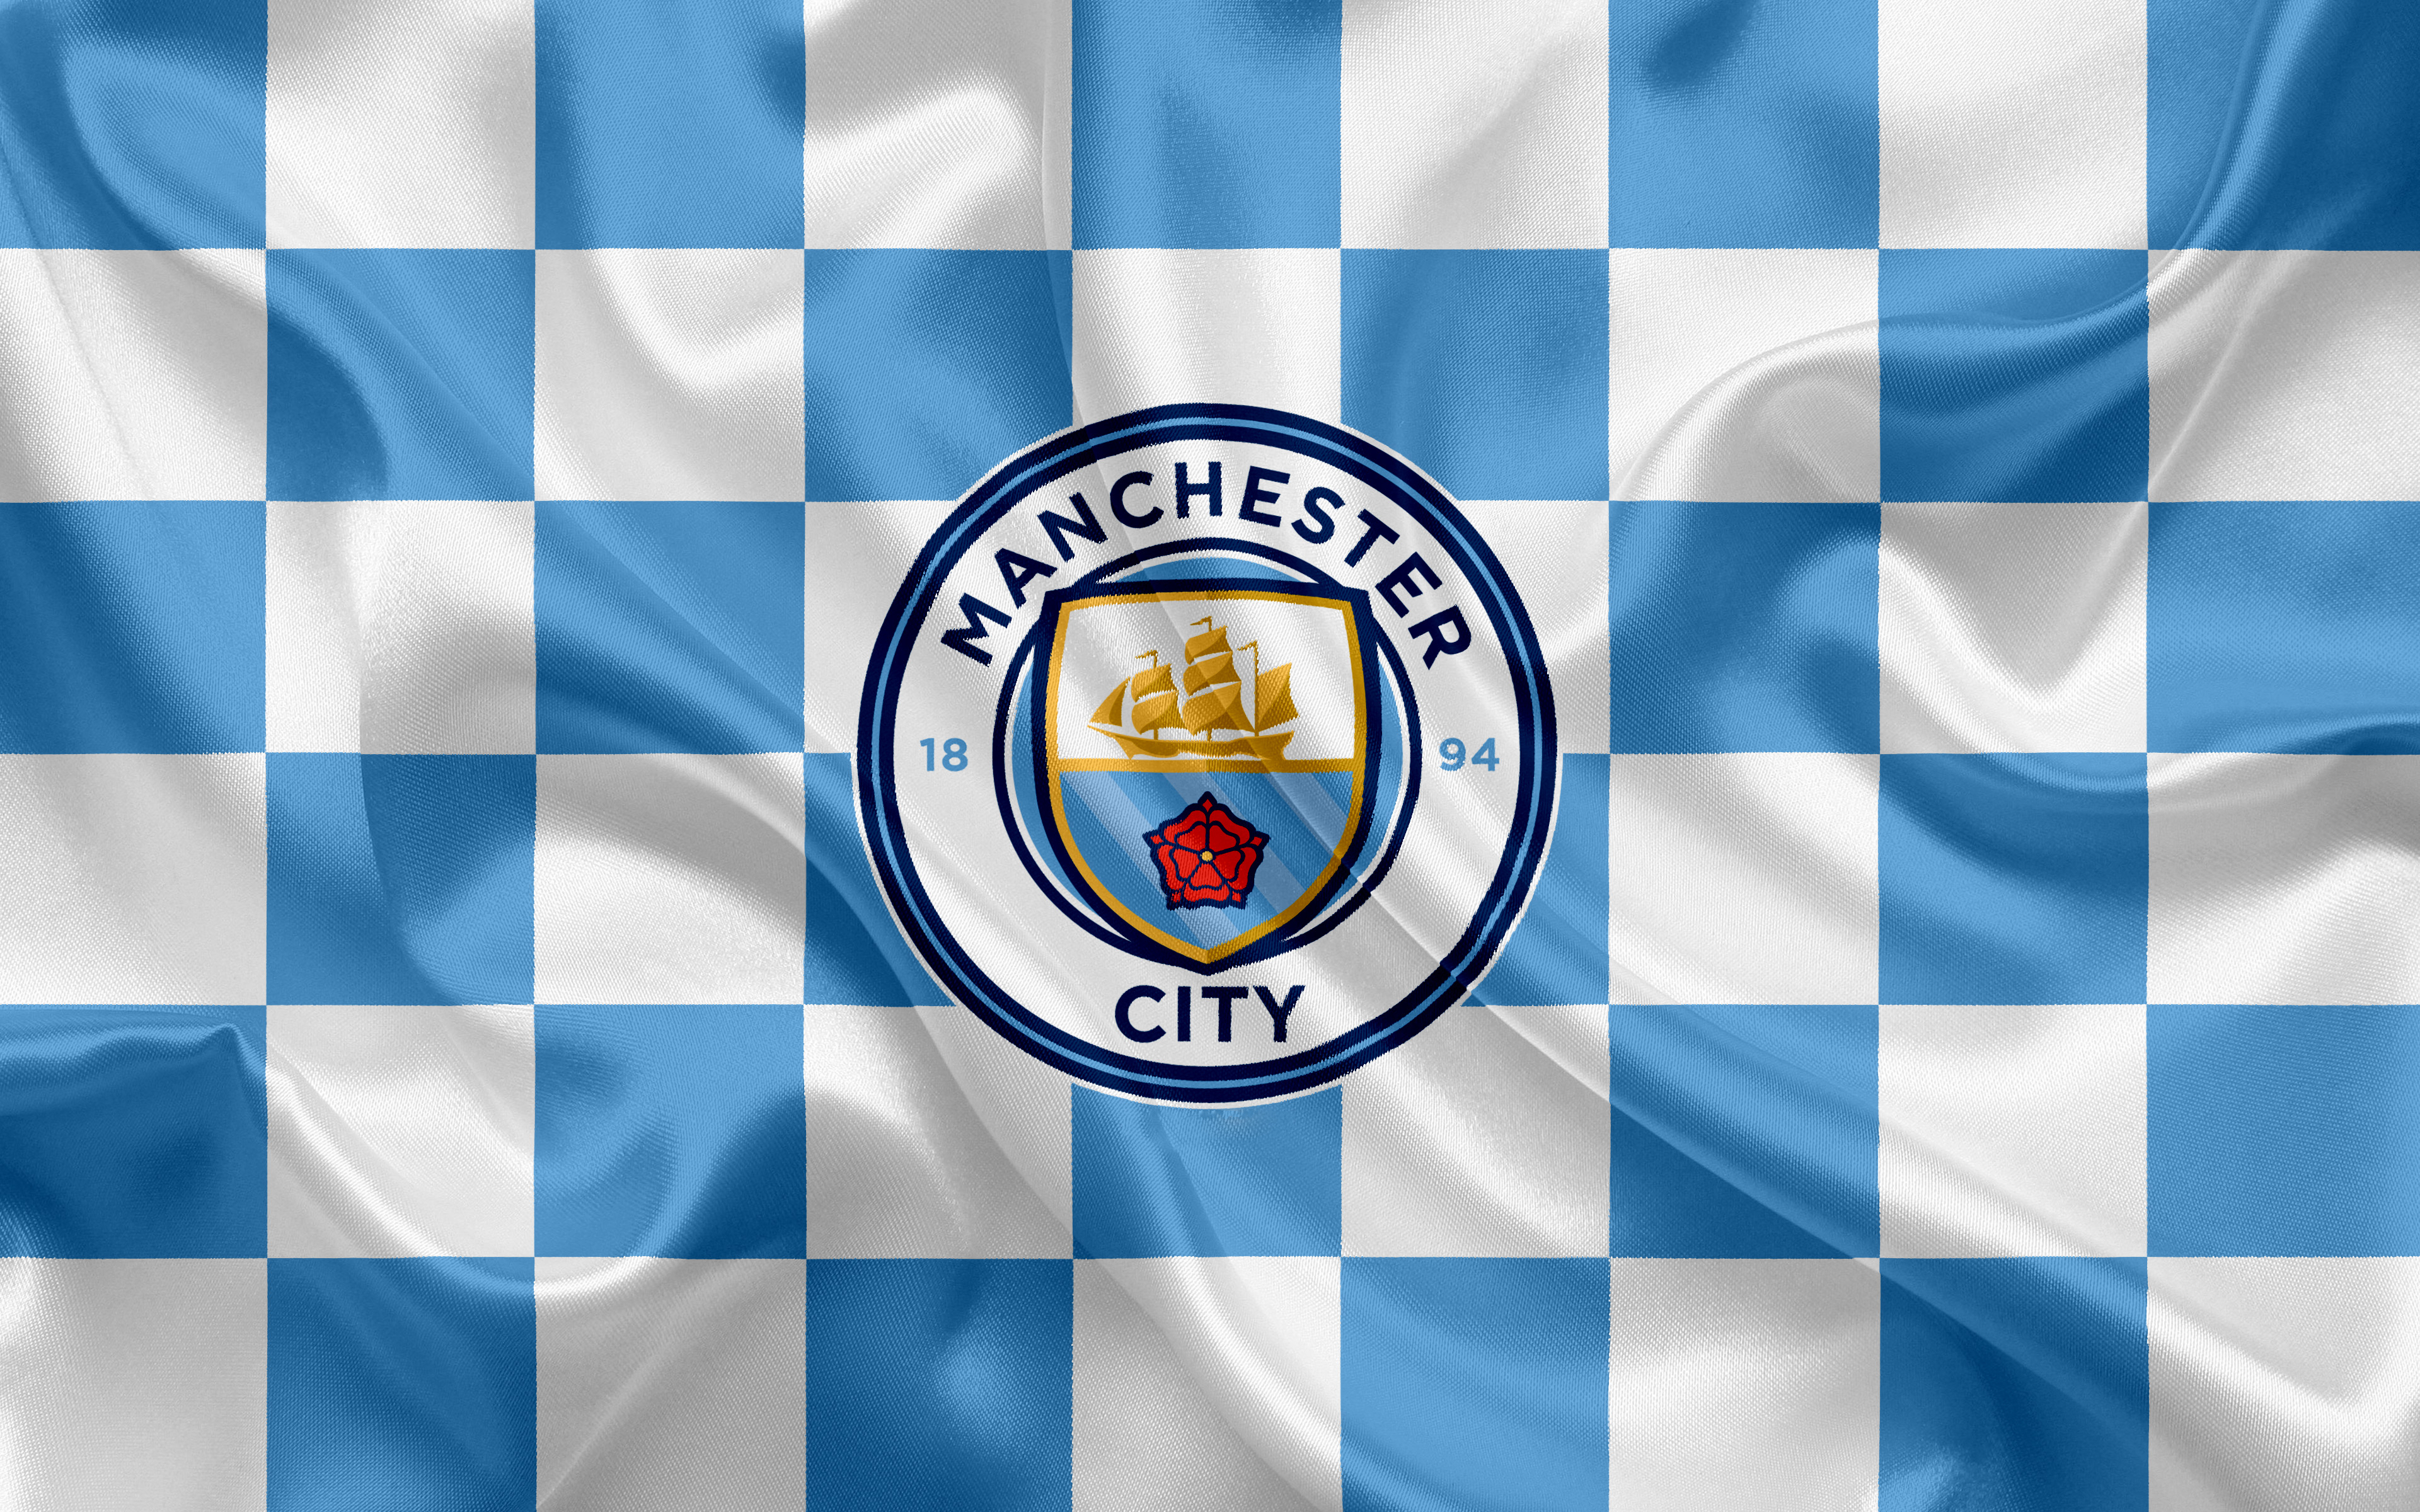 General 3840x2400 Manchester City  Football  soccer flag checkered